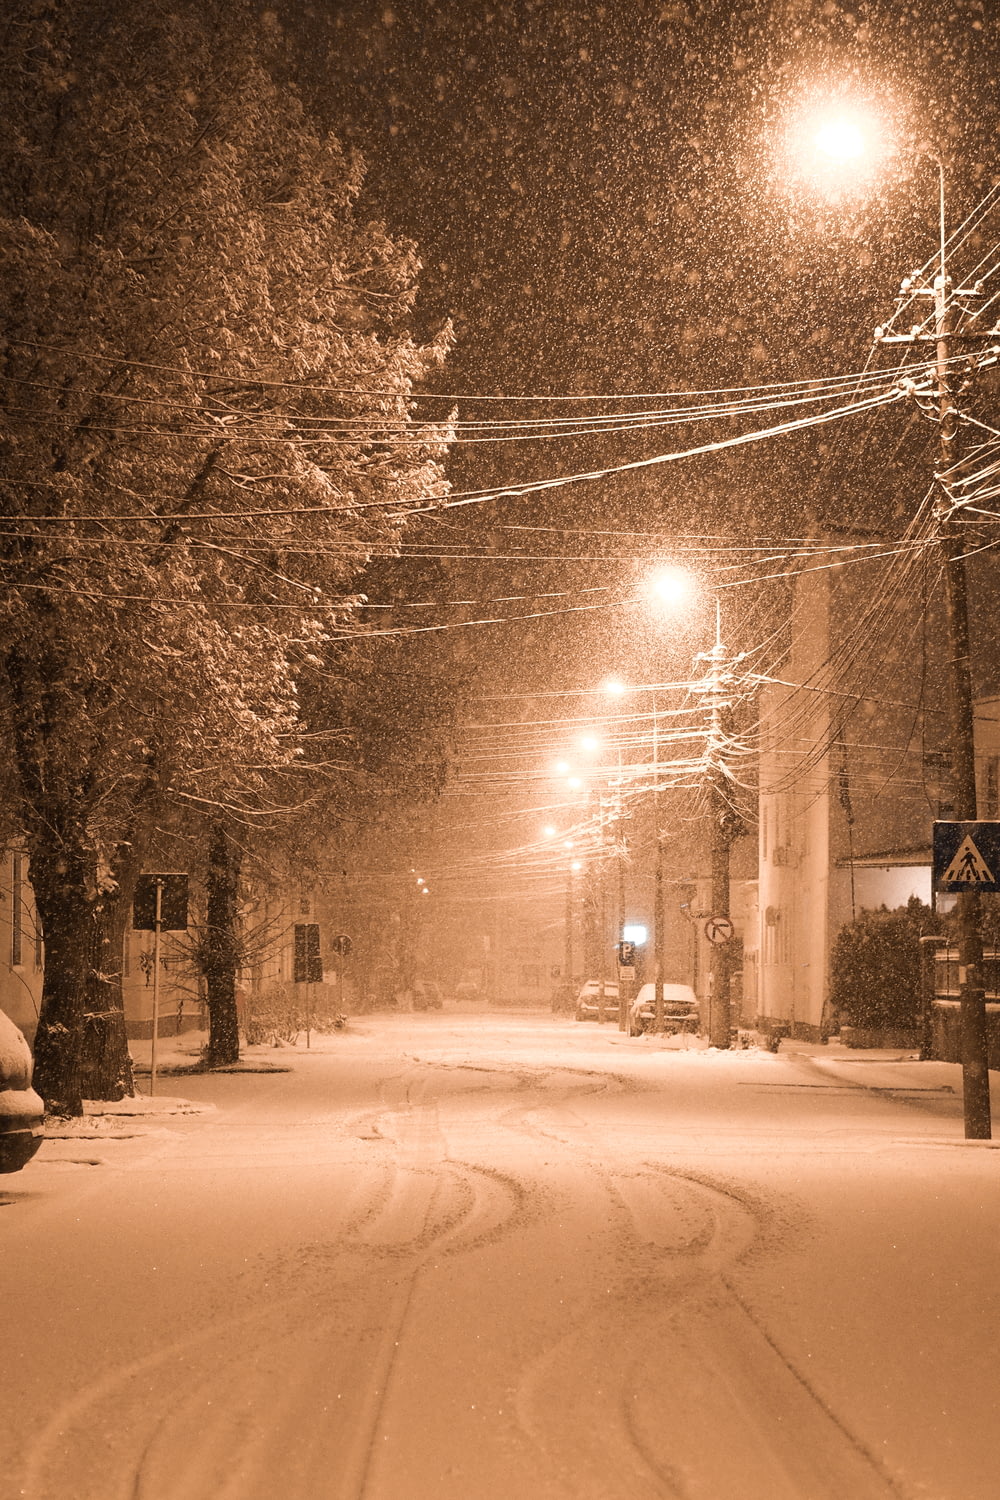 a snowy street at night with street lights